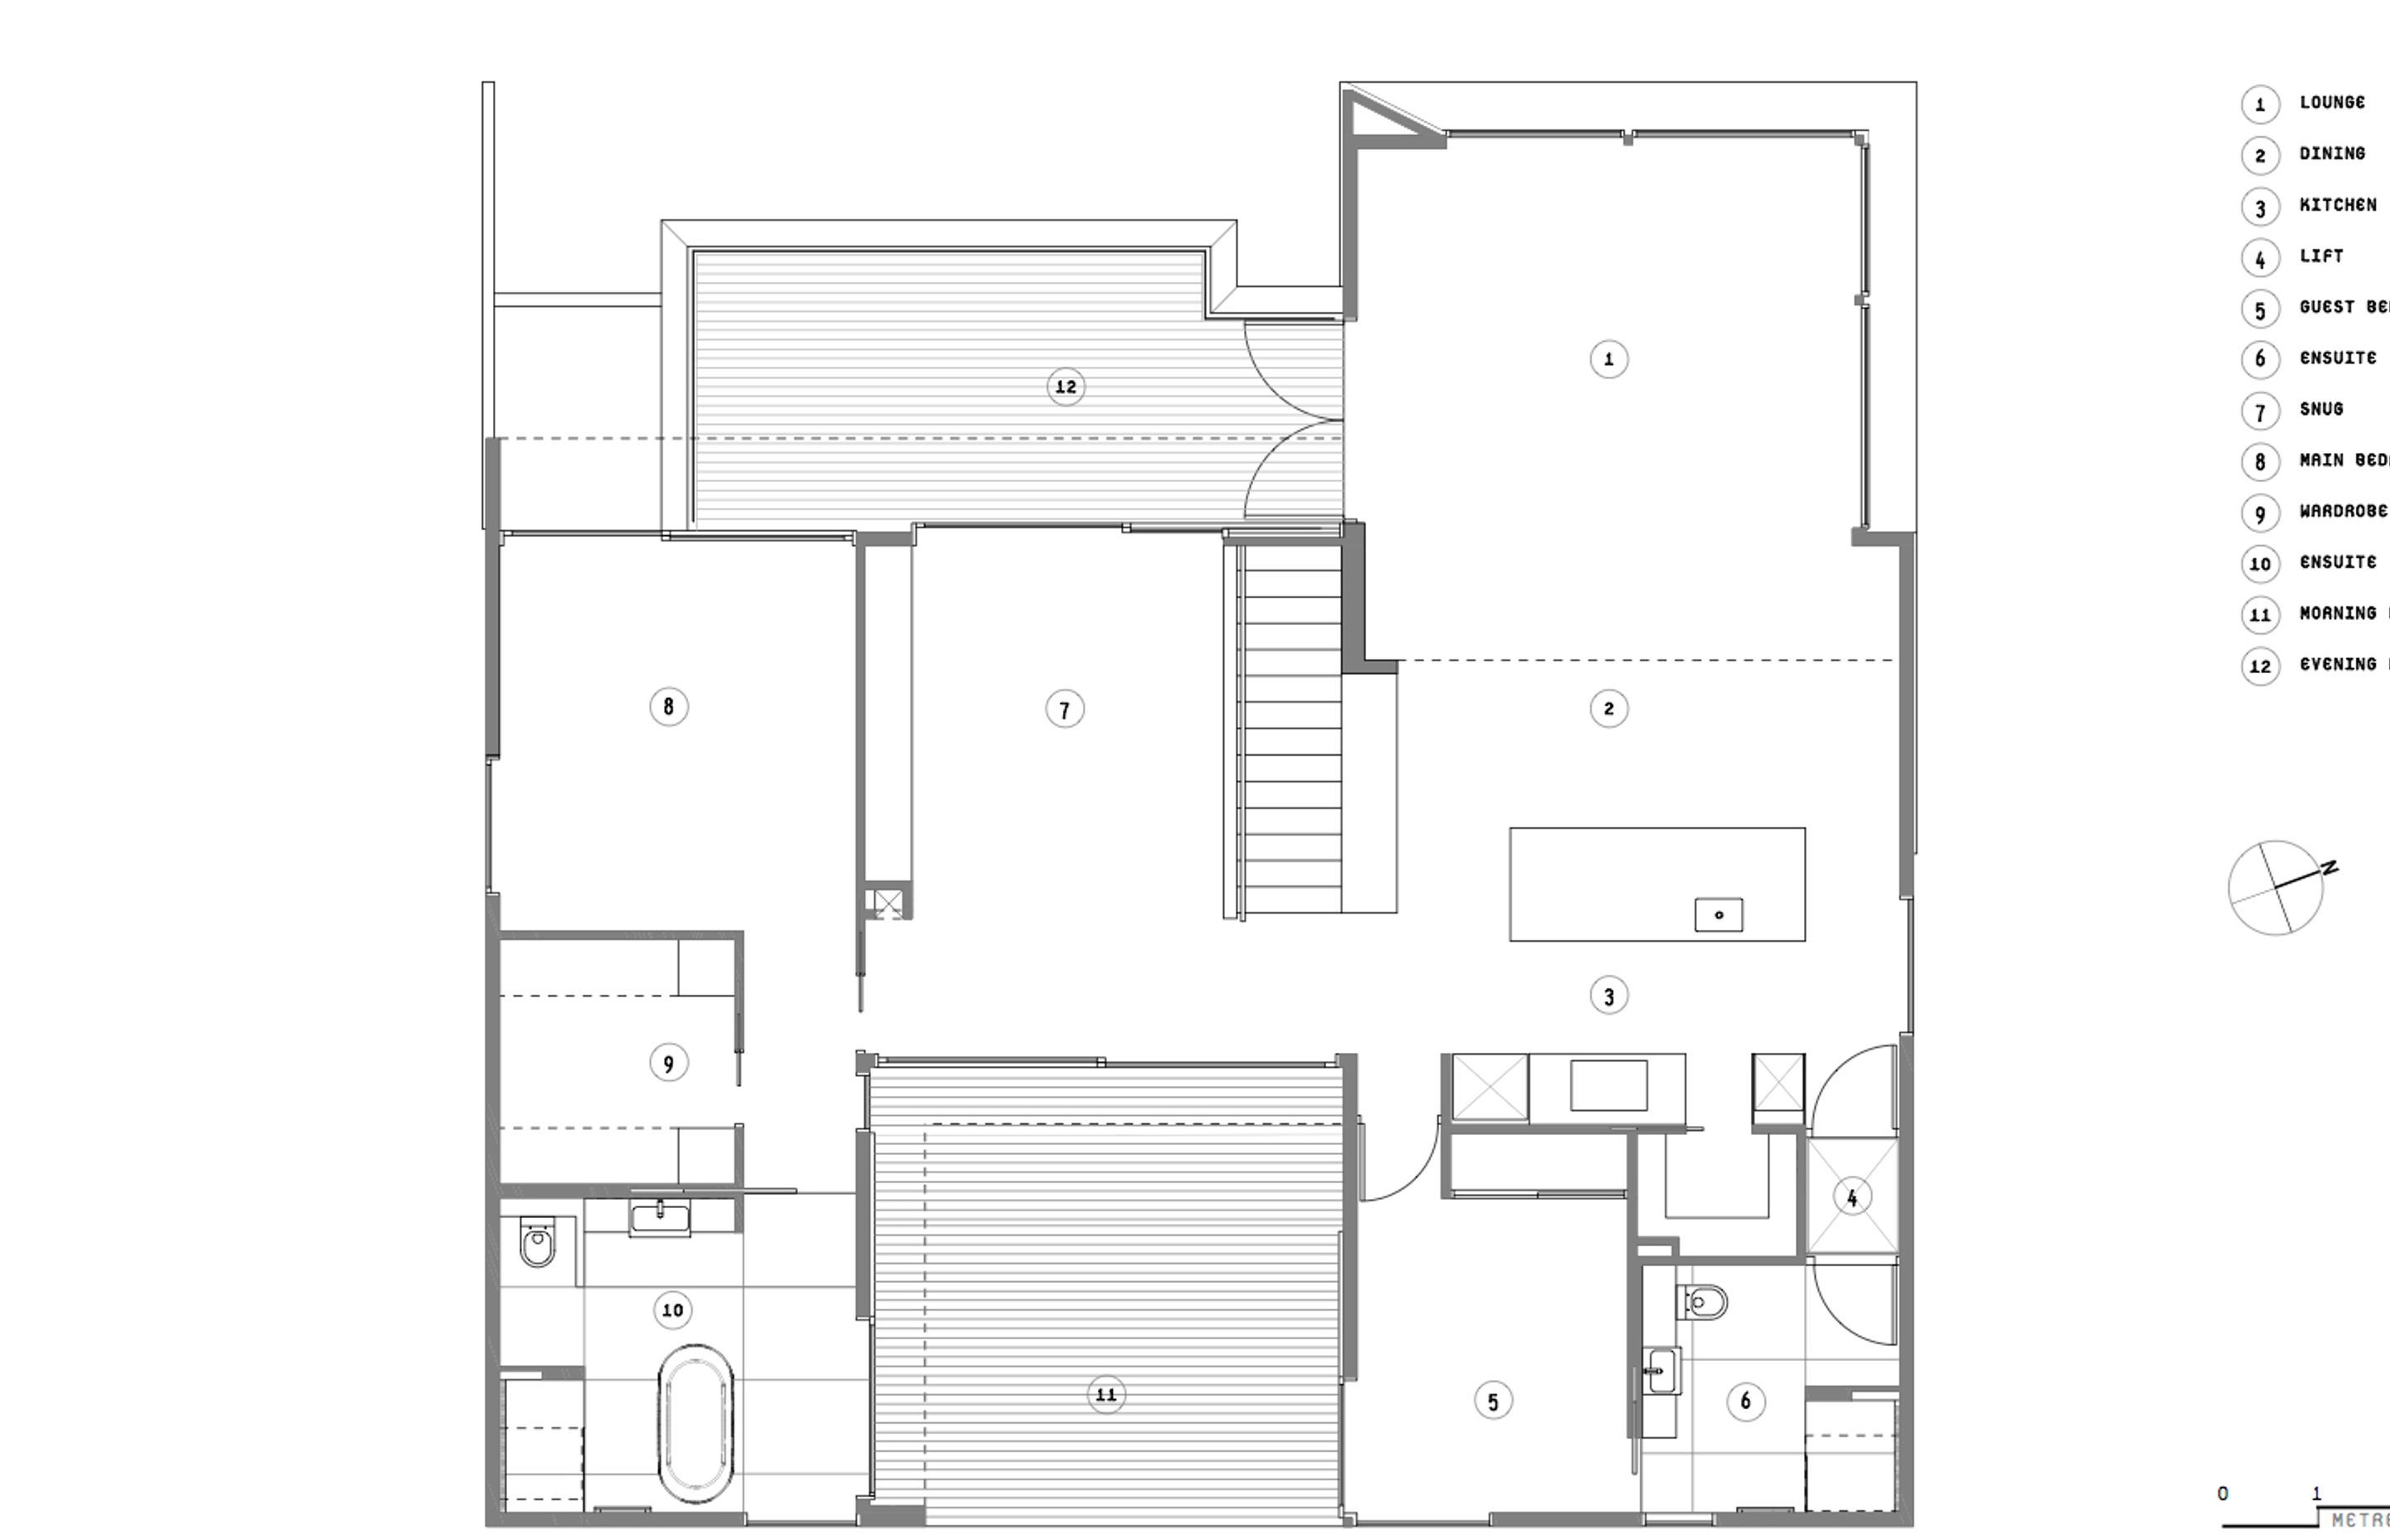 The first-floor plan by Objects shows the evening deck and lounge facing northwest towards the ocean.